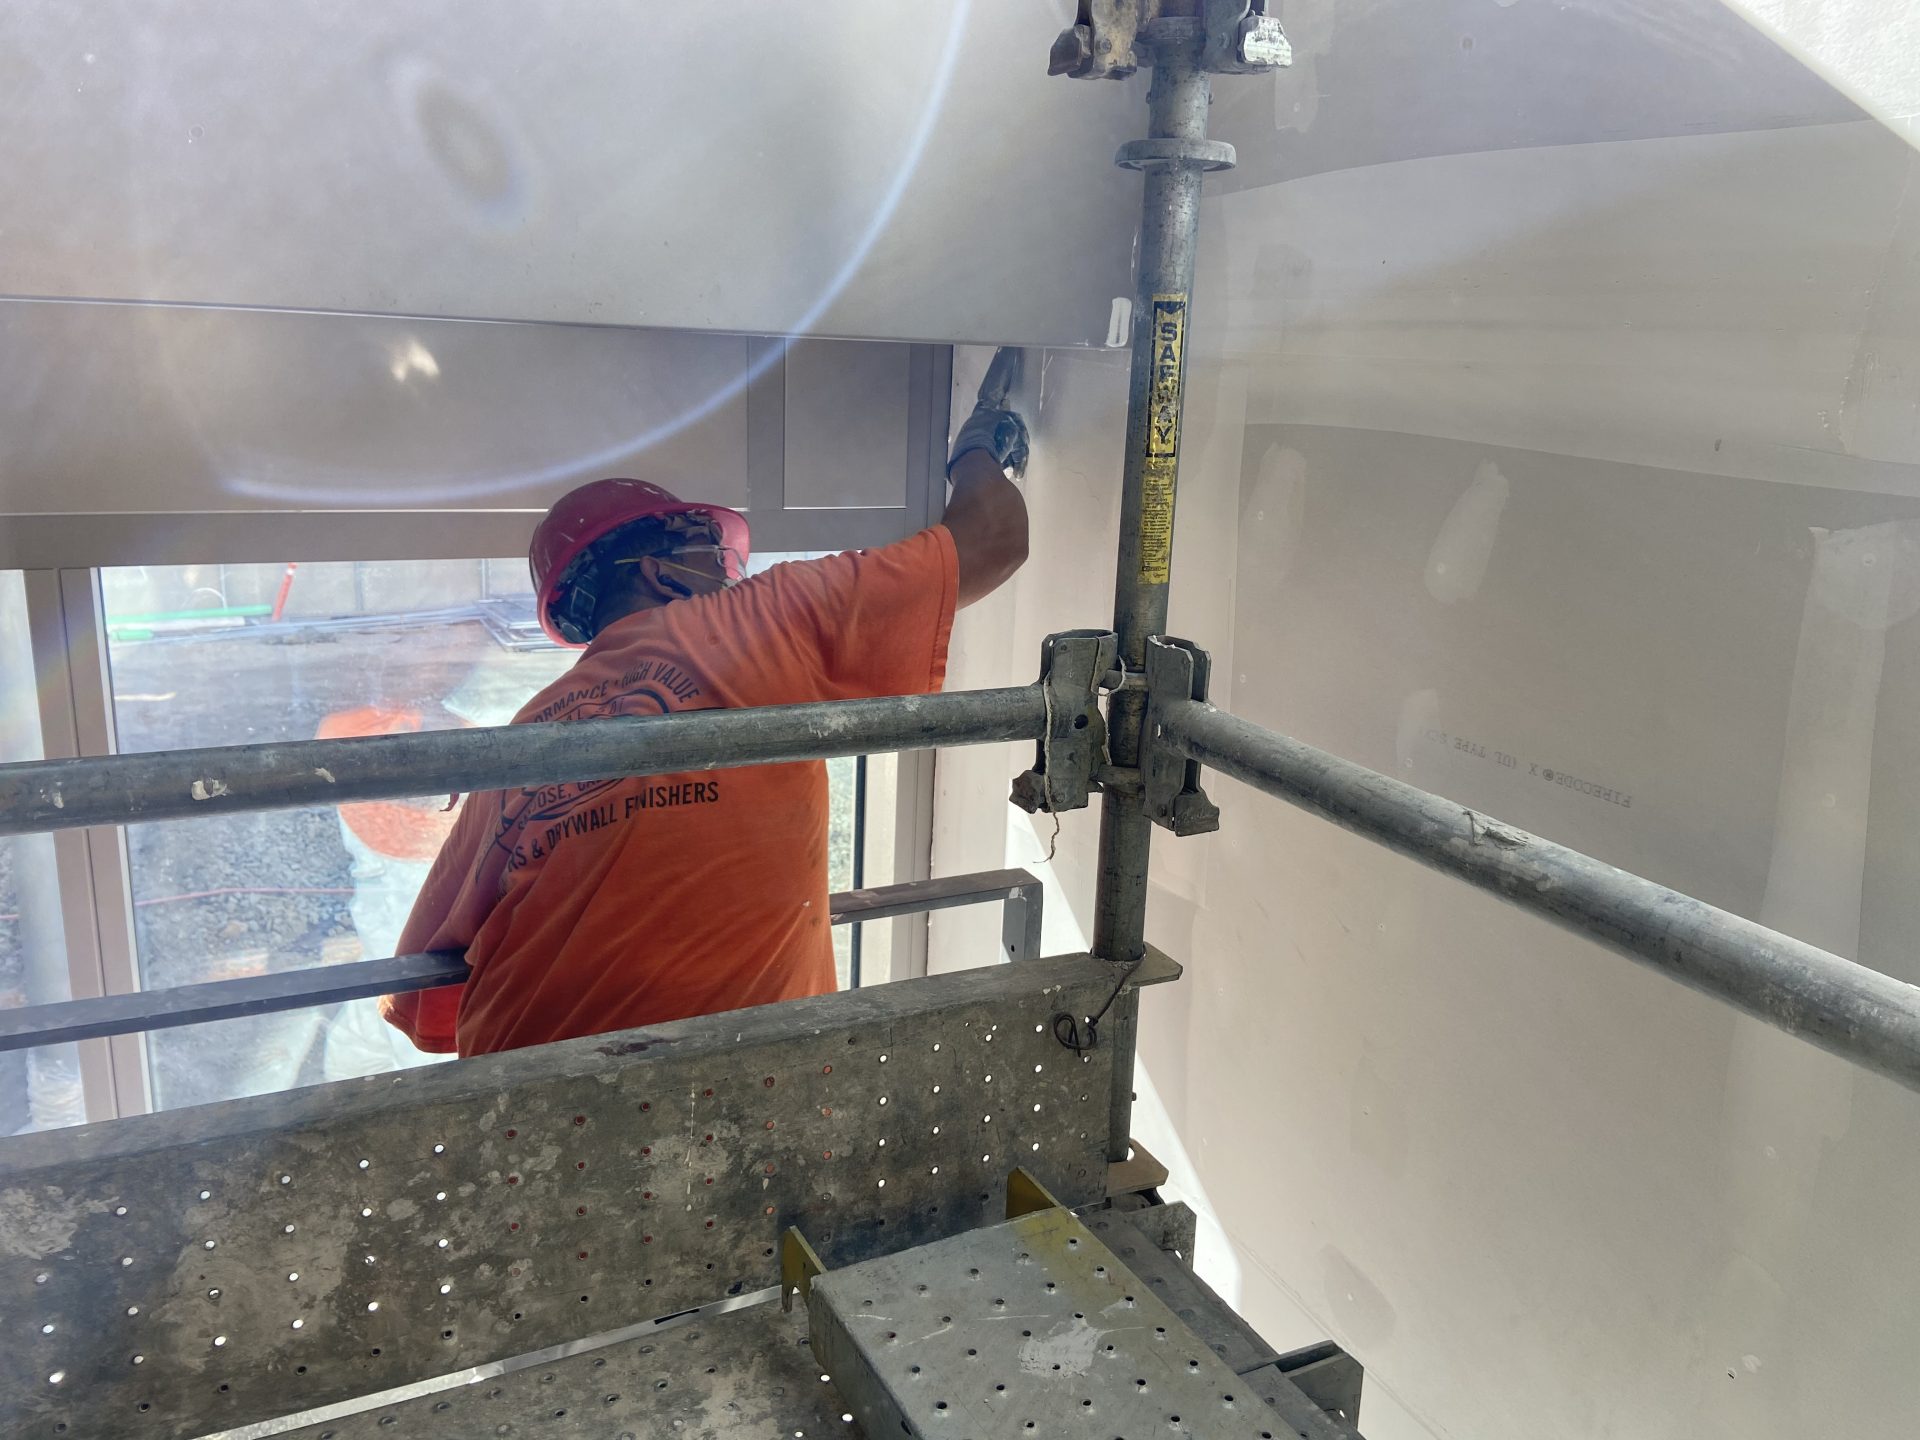 Image from the Gallery: Drywall Finishers 2020